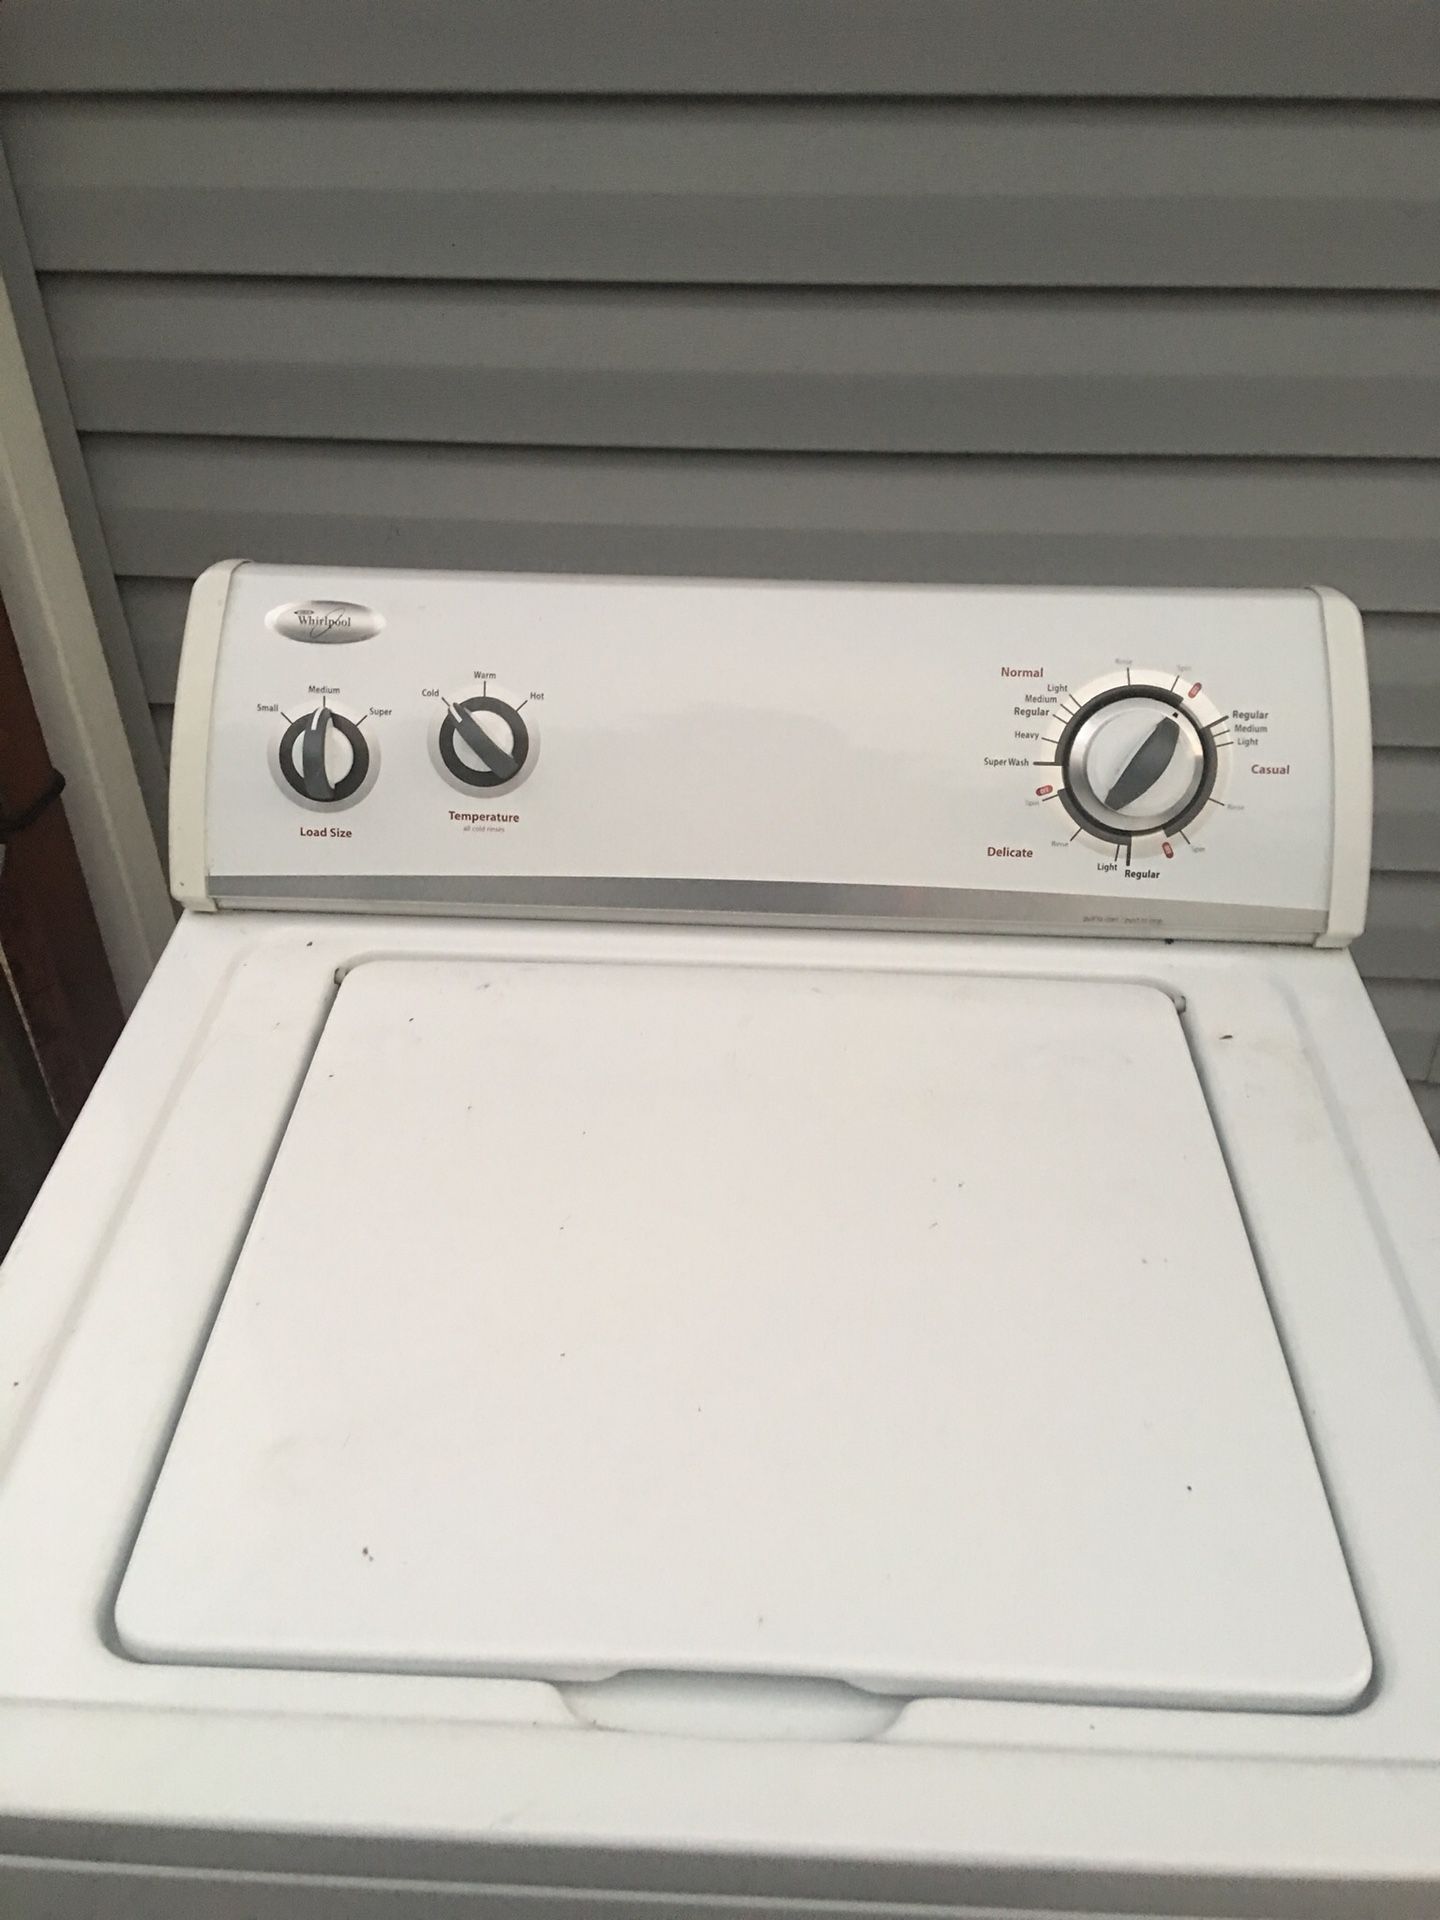 Whirlpool Washer . Good condition